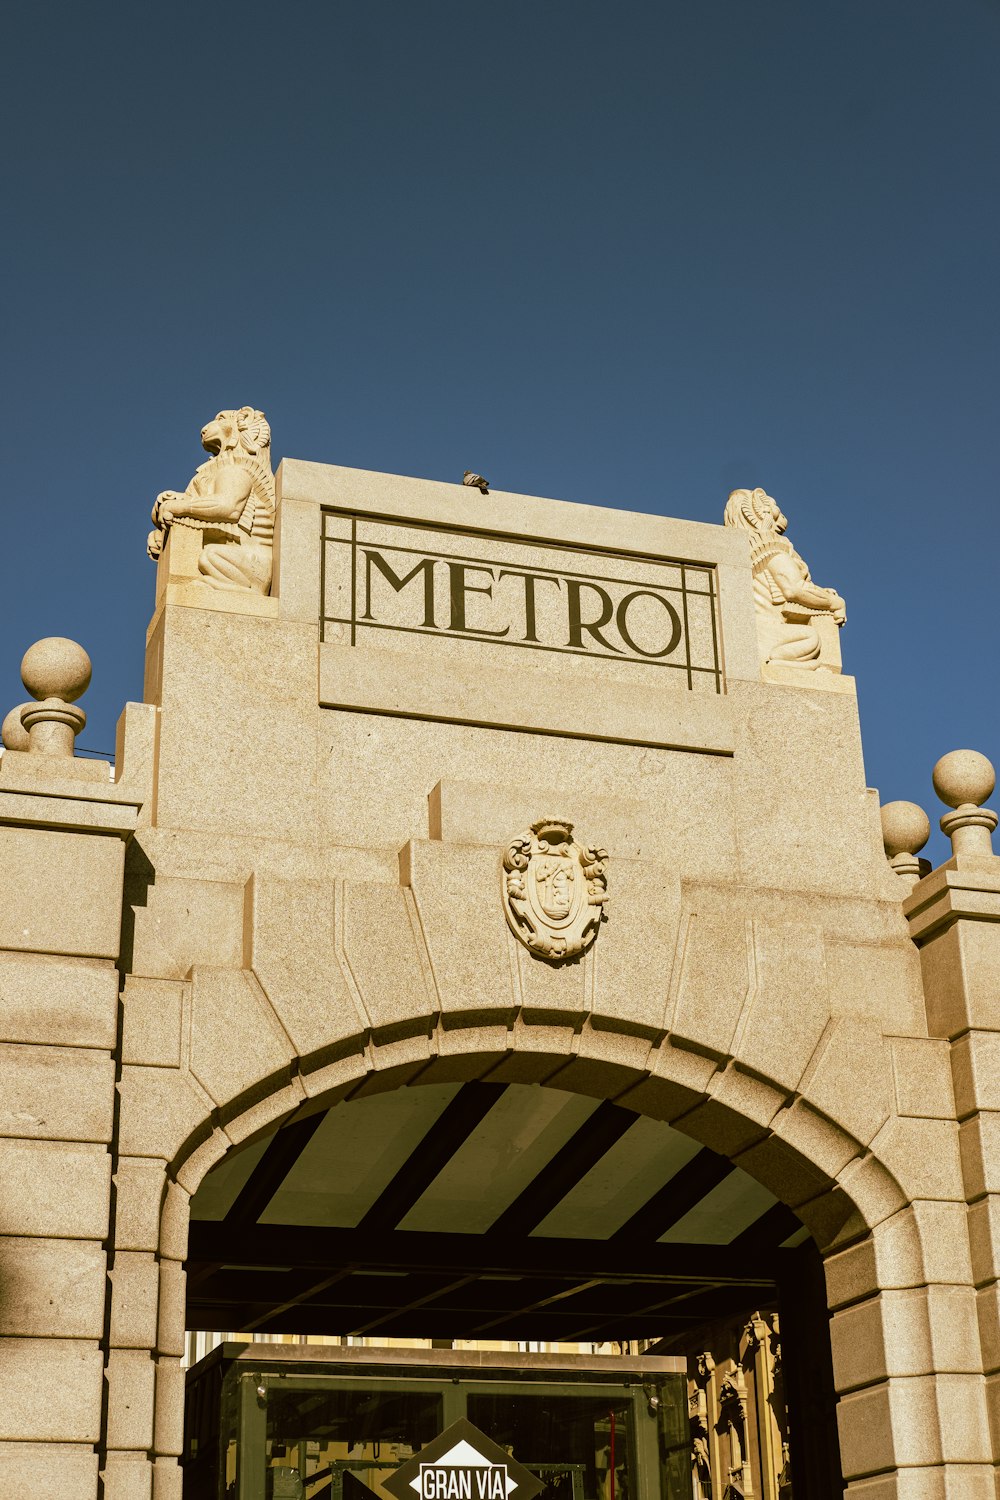 the entrance to metro station with a clock on it